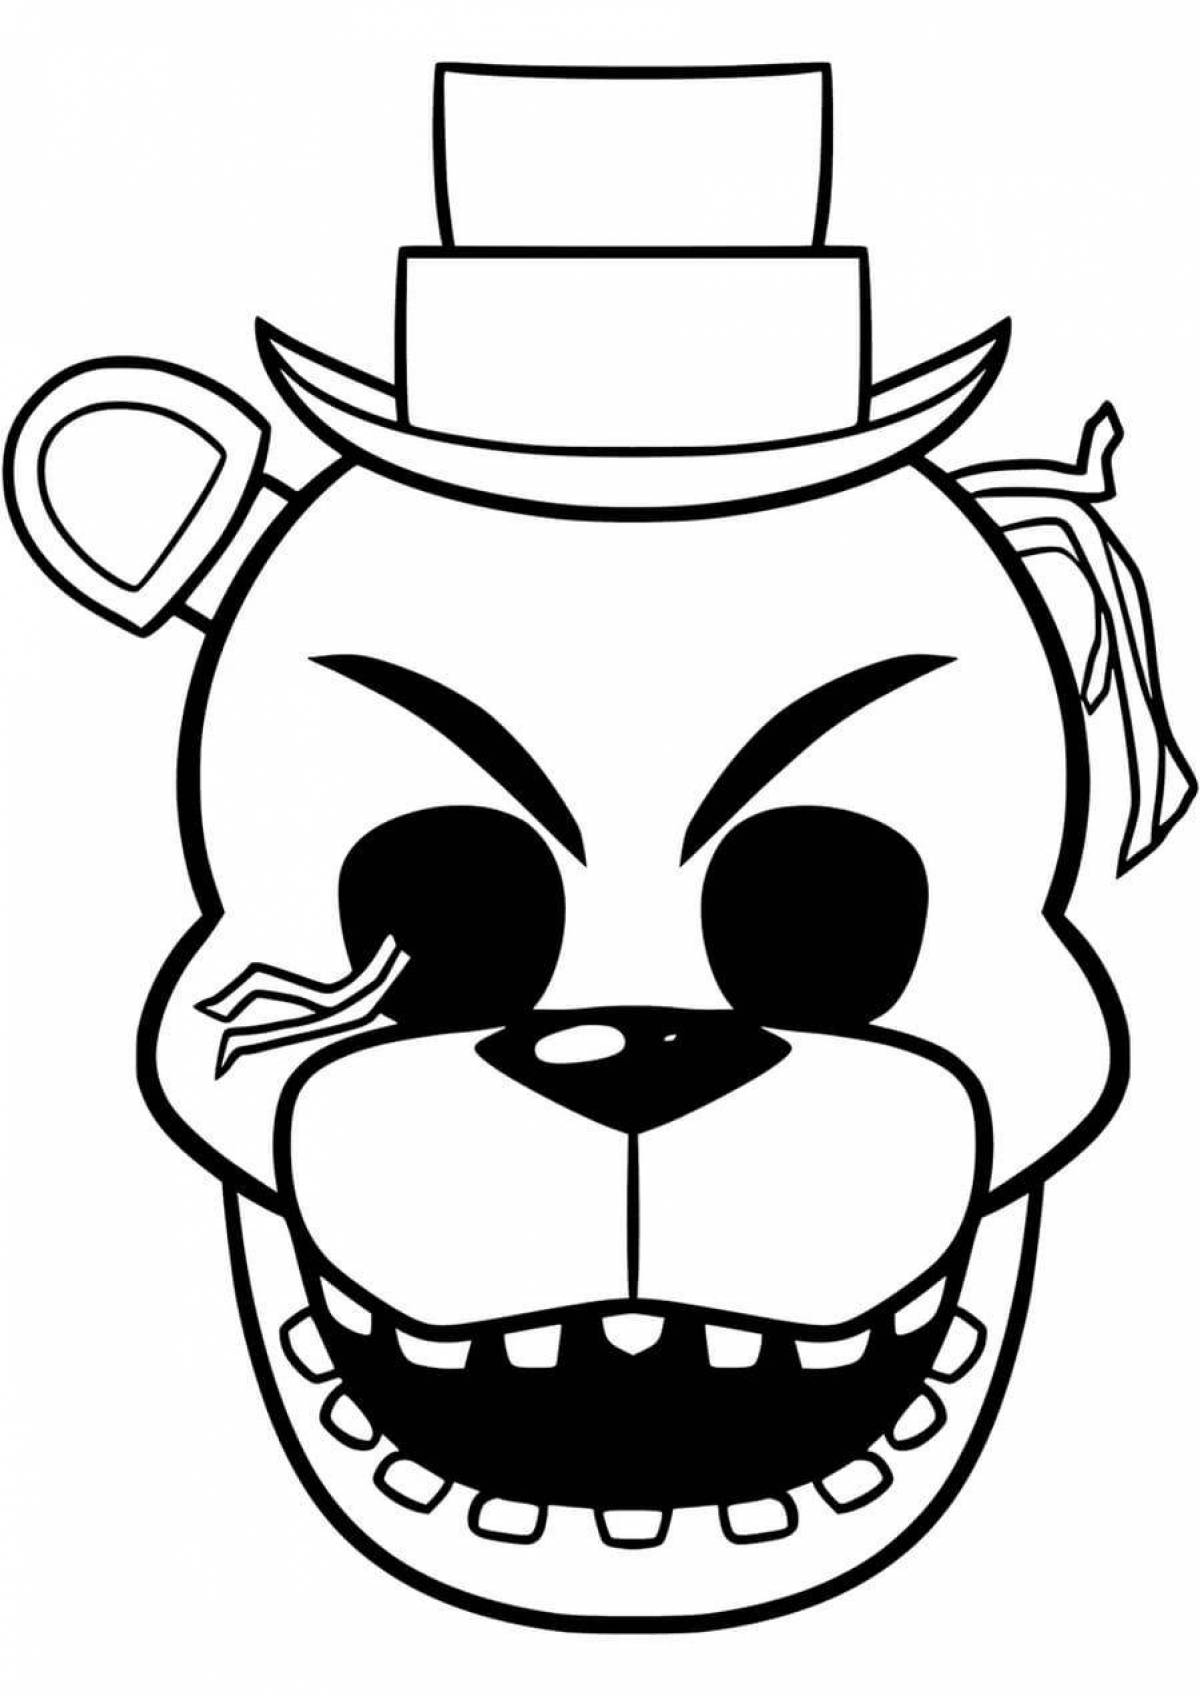 Привлечение five nights at freddy's coloring page